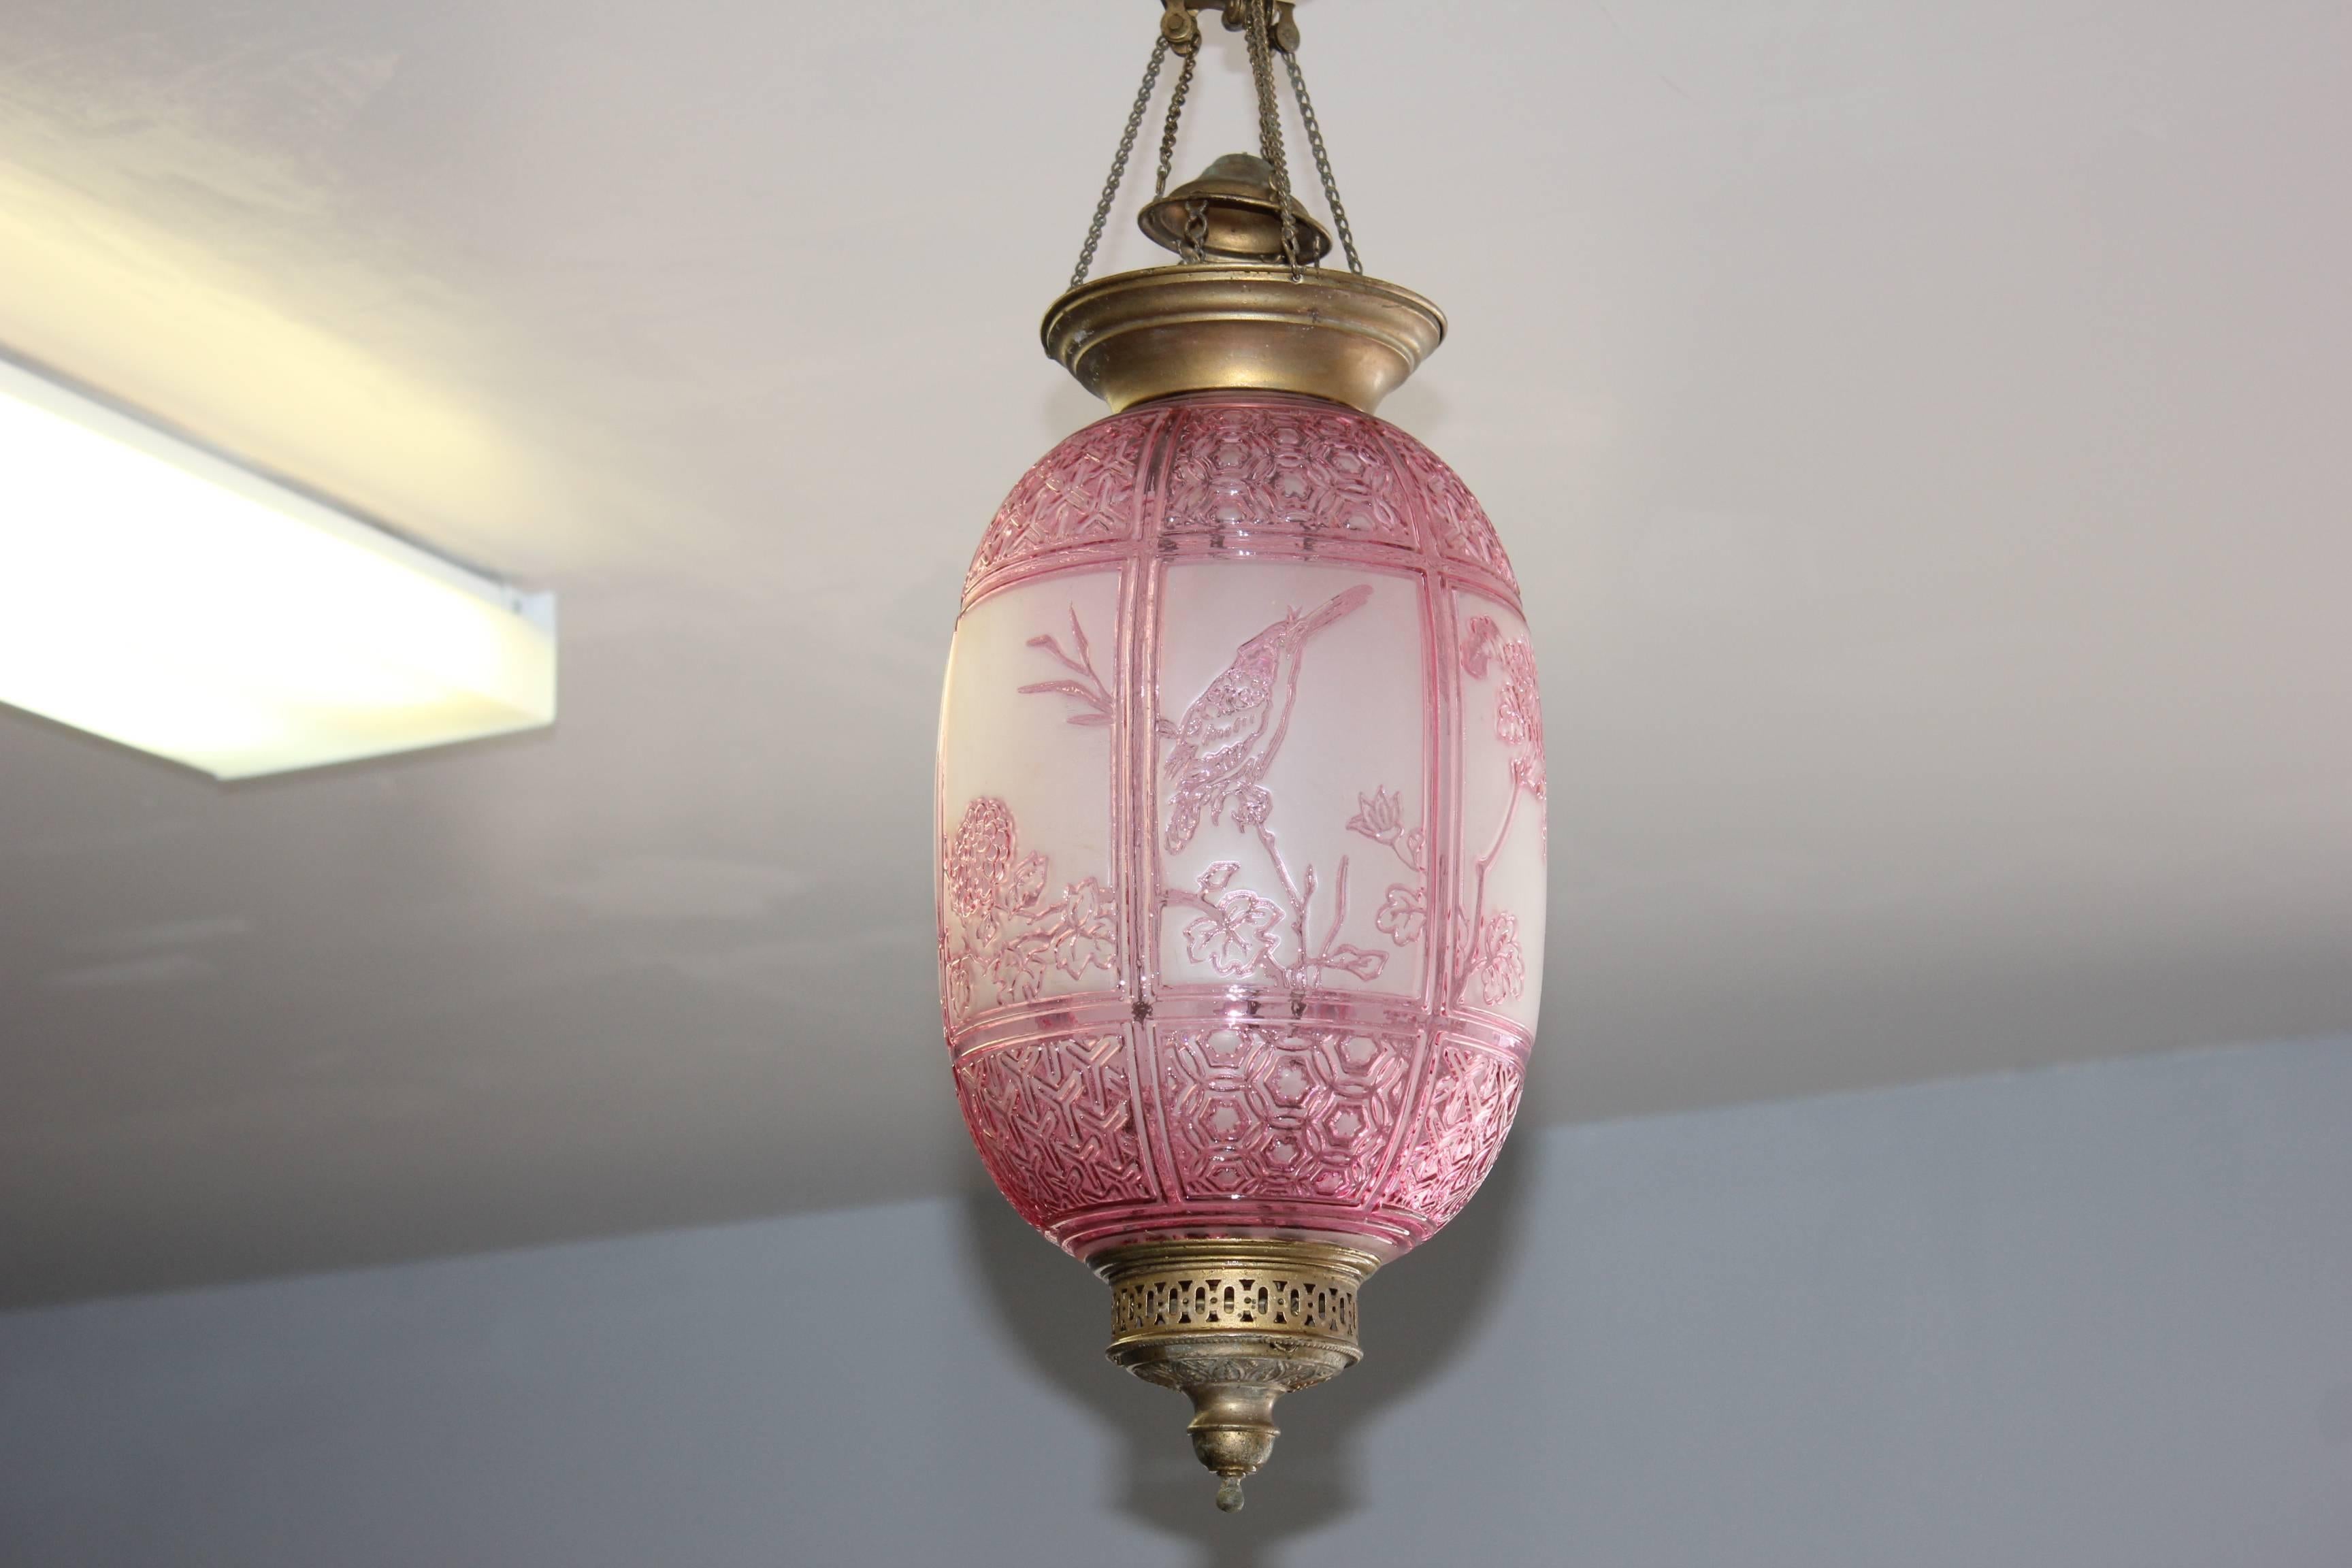 A truly rare item! A unique pink color electrified oil lantern signed by Baccarat, 19th century France. the lantern or the pendant are in perfect condition, no chips or cracks to the glass. Some oxidation to brass components. Very detailed scenes/